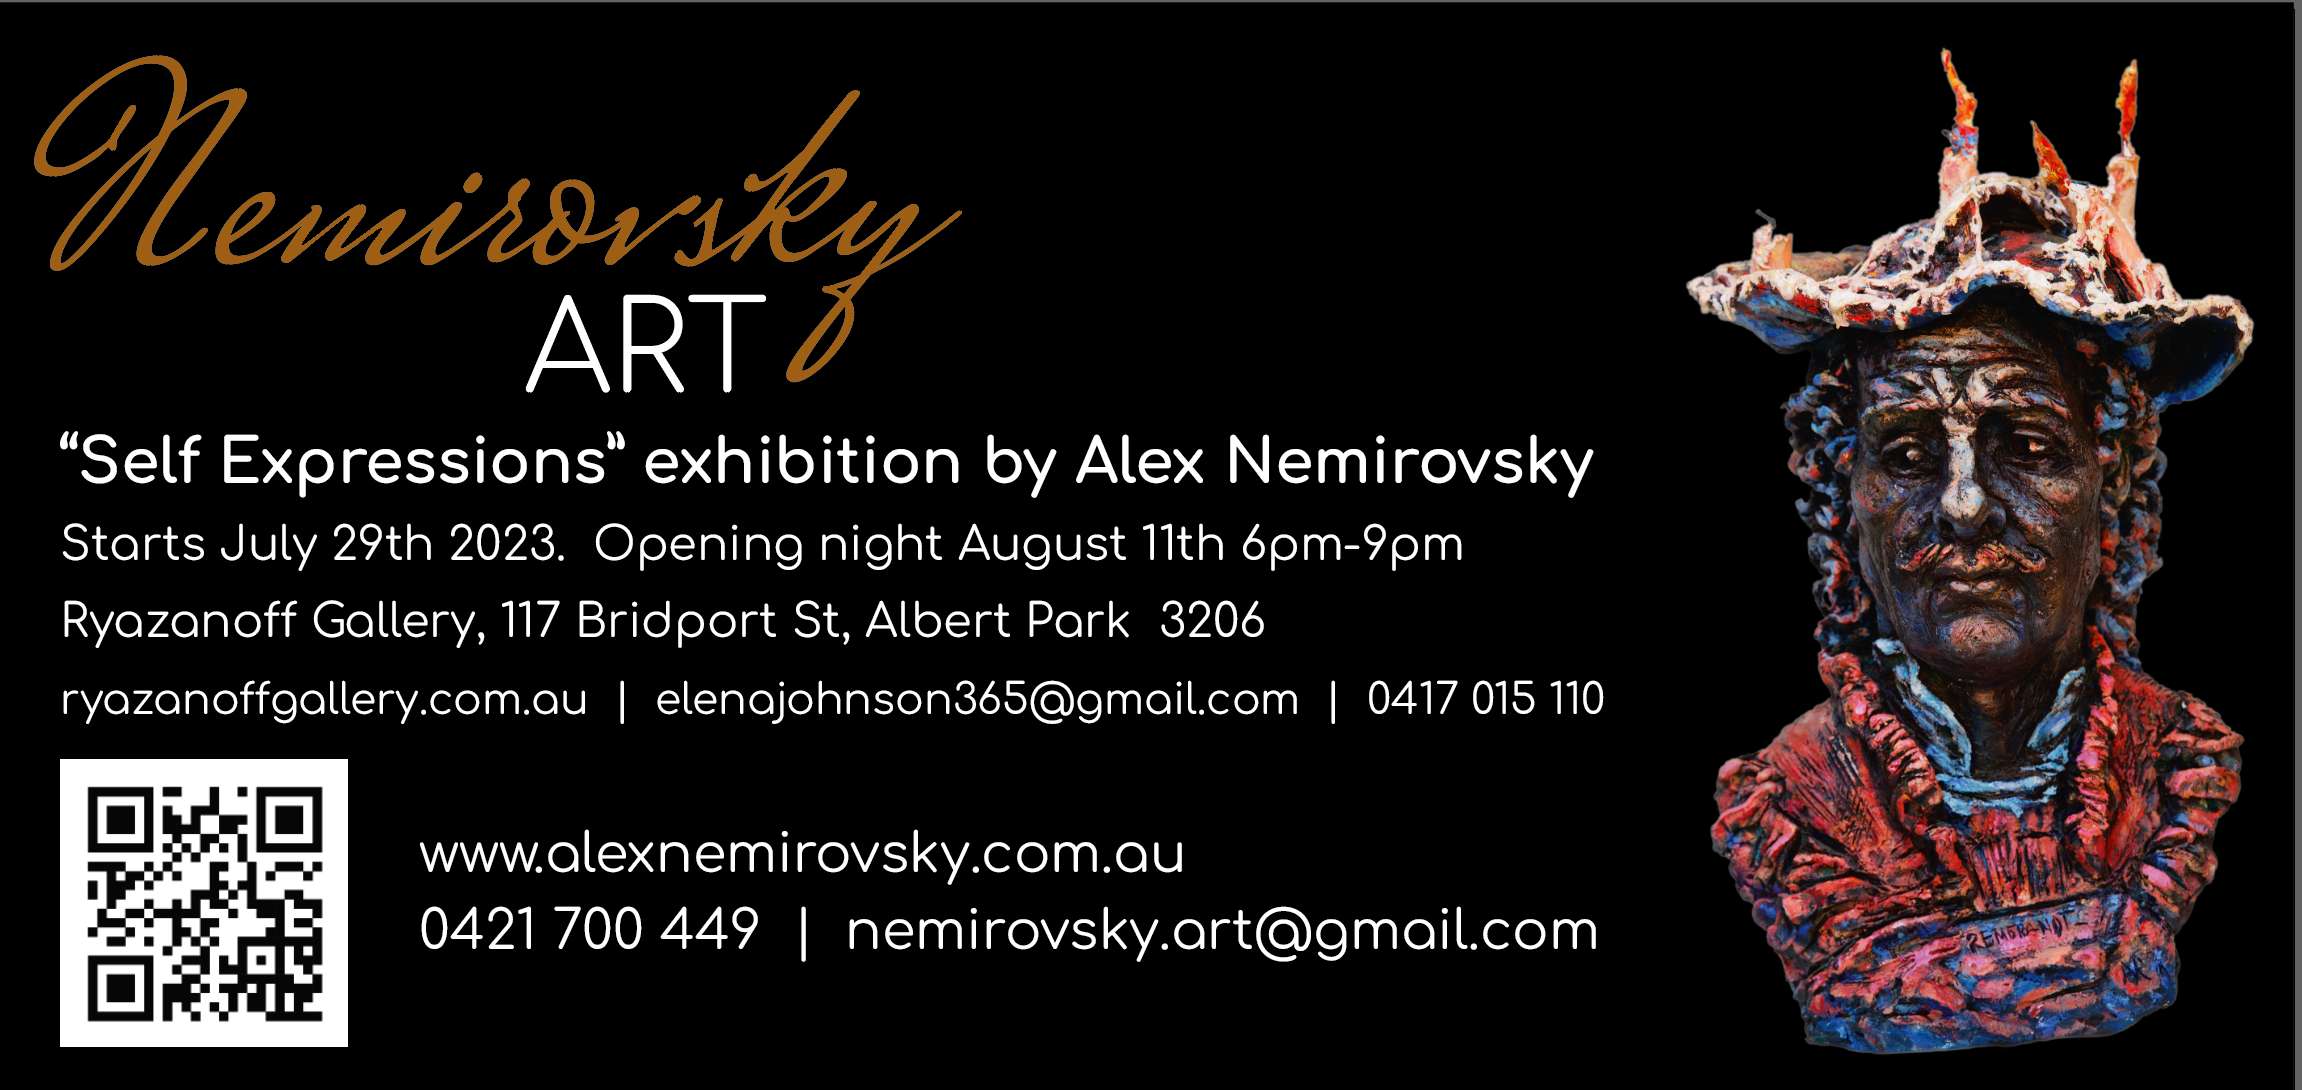 Announcing “Self Expressions”: An Exhibition by Alex Nemirovsky at Ryazanoff Gallery